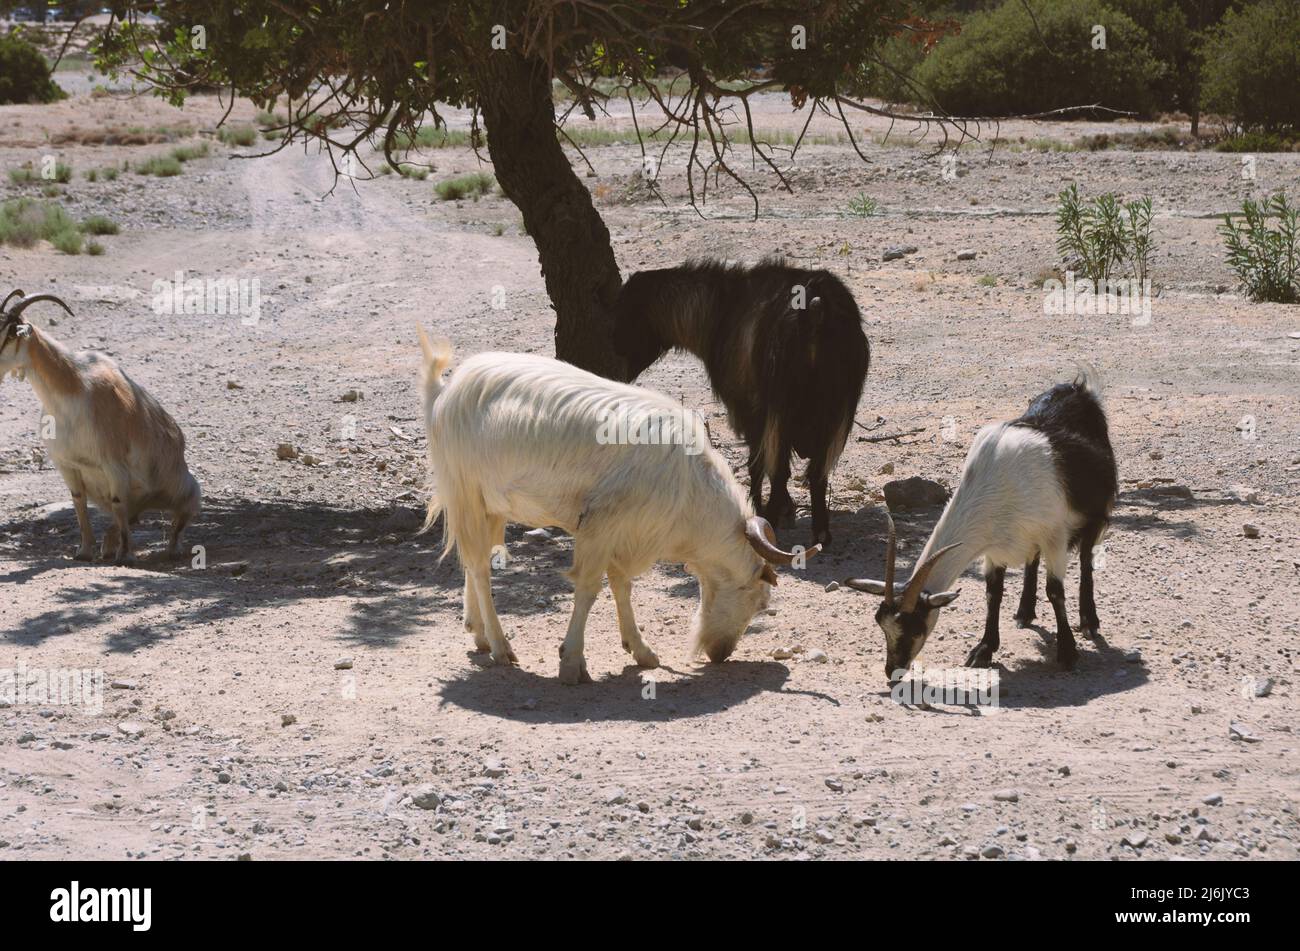 Three goats are hiding in the shade of a tree and one goat is pissing in a rocky area (Rhodes, Greece) Stock Photo